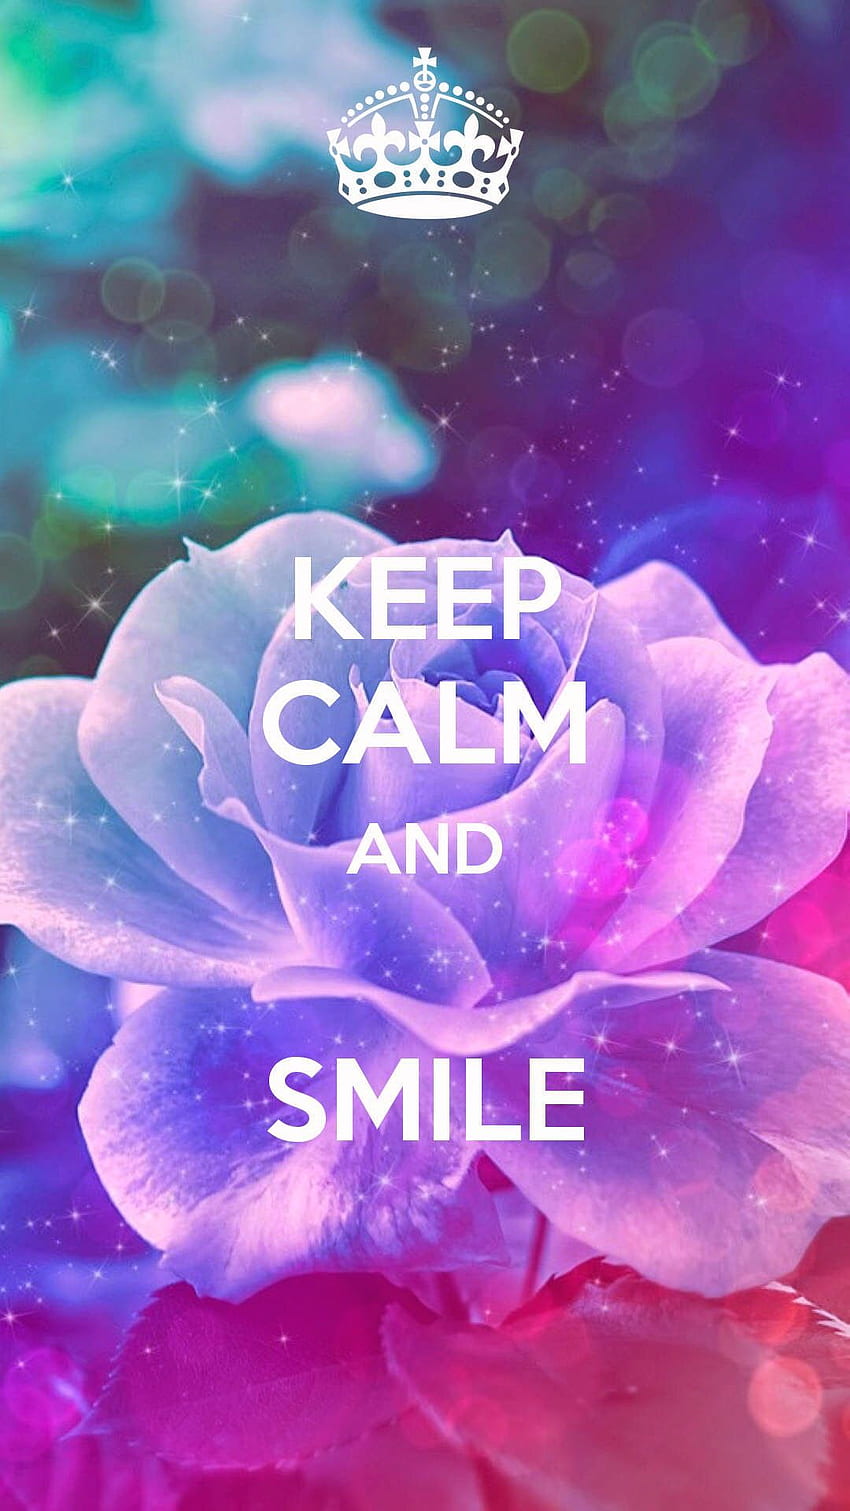 Keep Calm Background Hupages iPhone . Tetap tenang, Tetap tenang kutipan, Tetap tenang dan tersenyum wallpaper ponsel HD